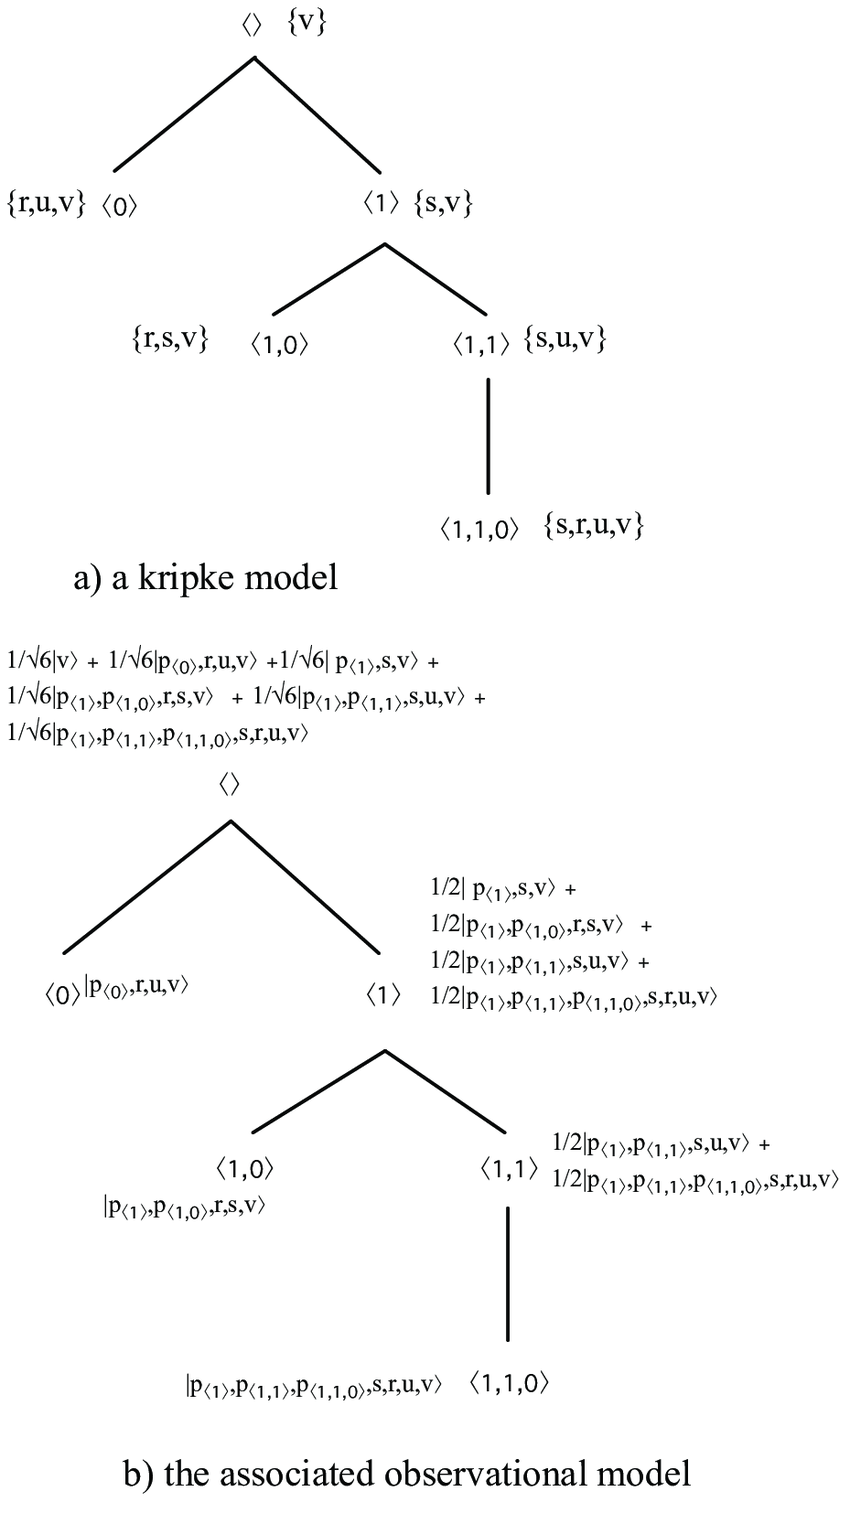 The Transformation Of A Kripke Model In A Observational Tree As A Download Scientific Diagram